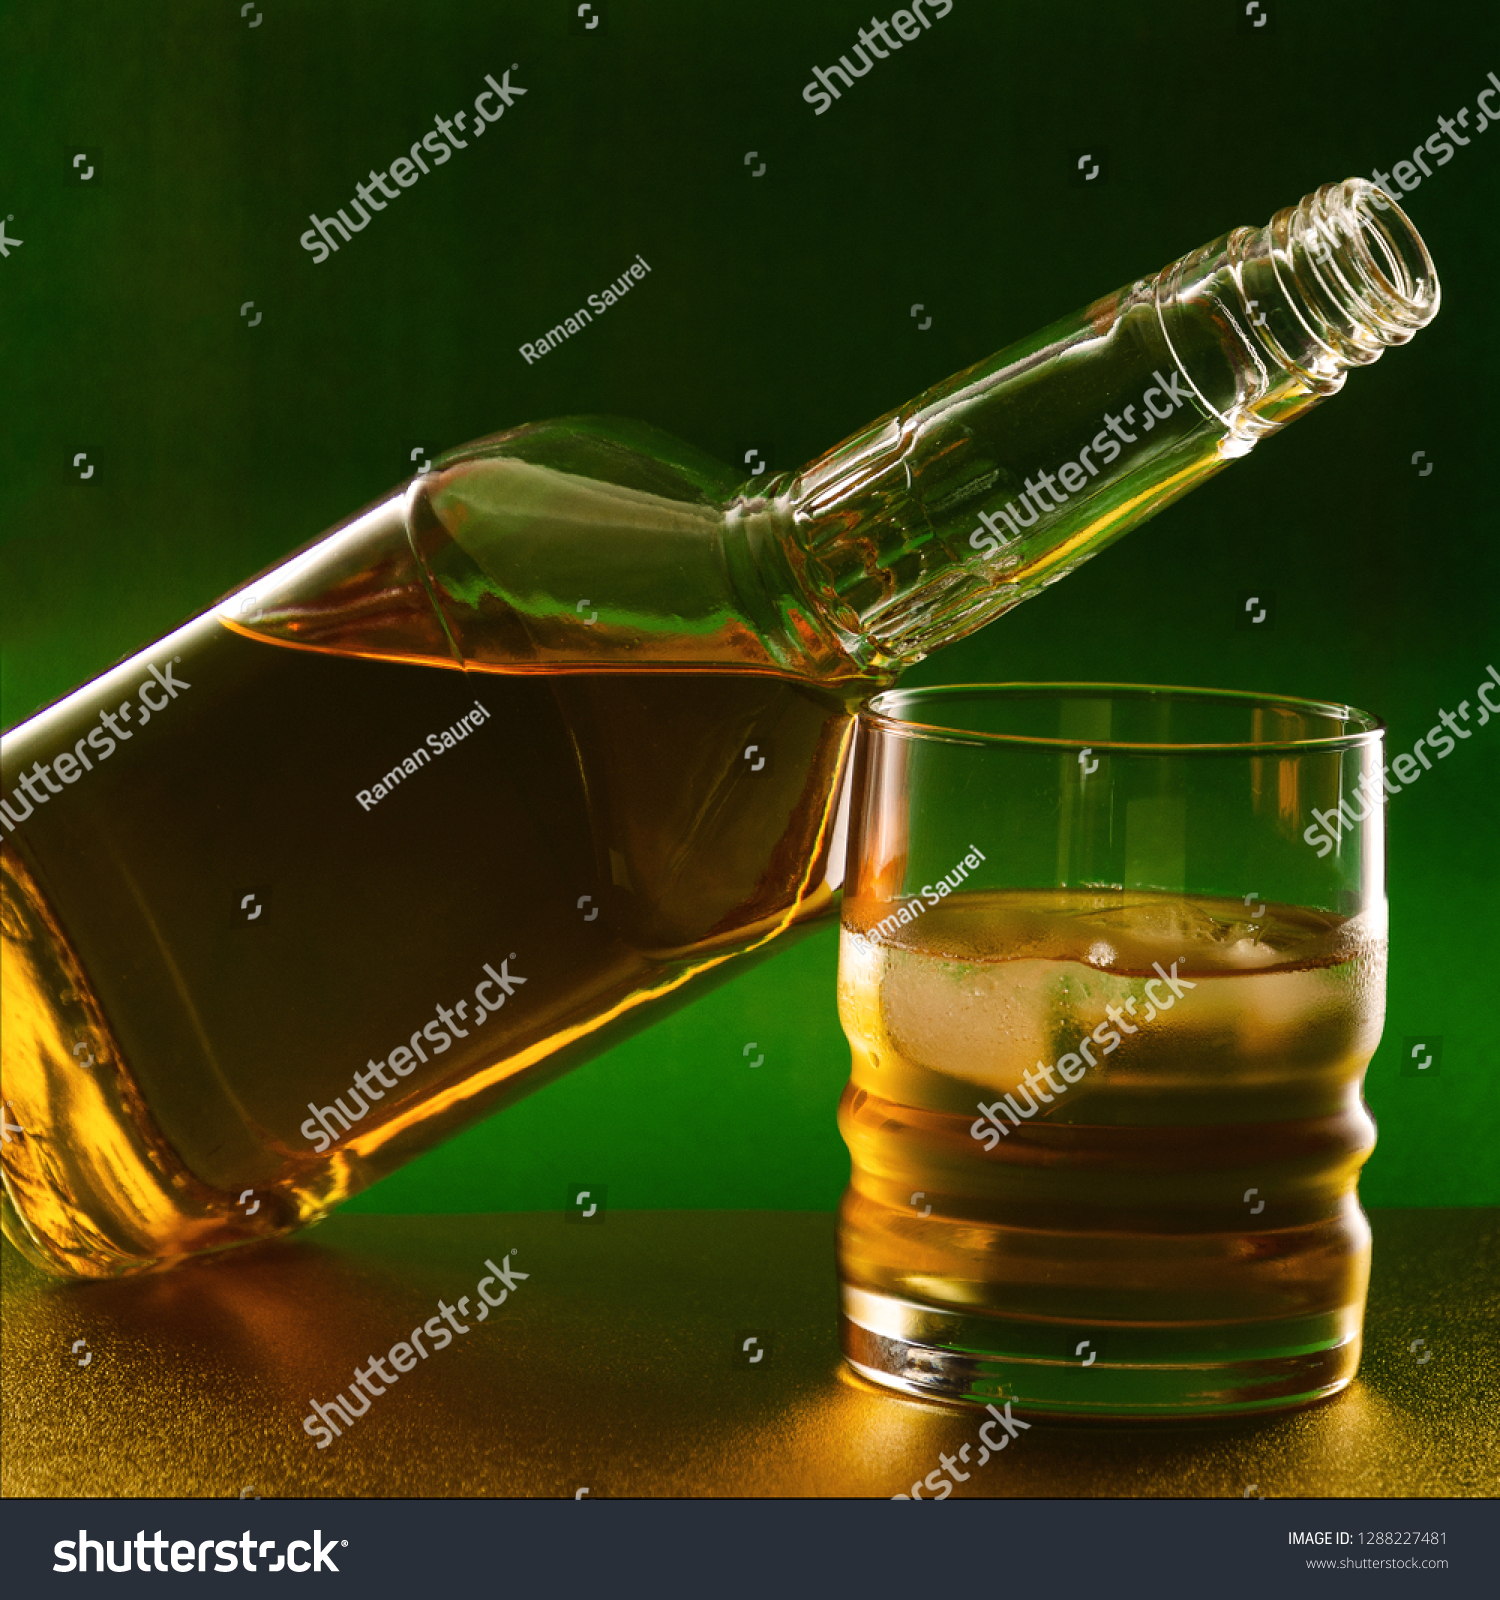 Download Bottle Glass Whiskey On Green Golden Stock Photo Edit Now 1288227481 Yellowimages Mockups